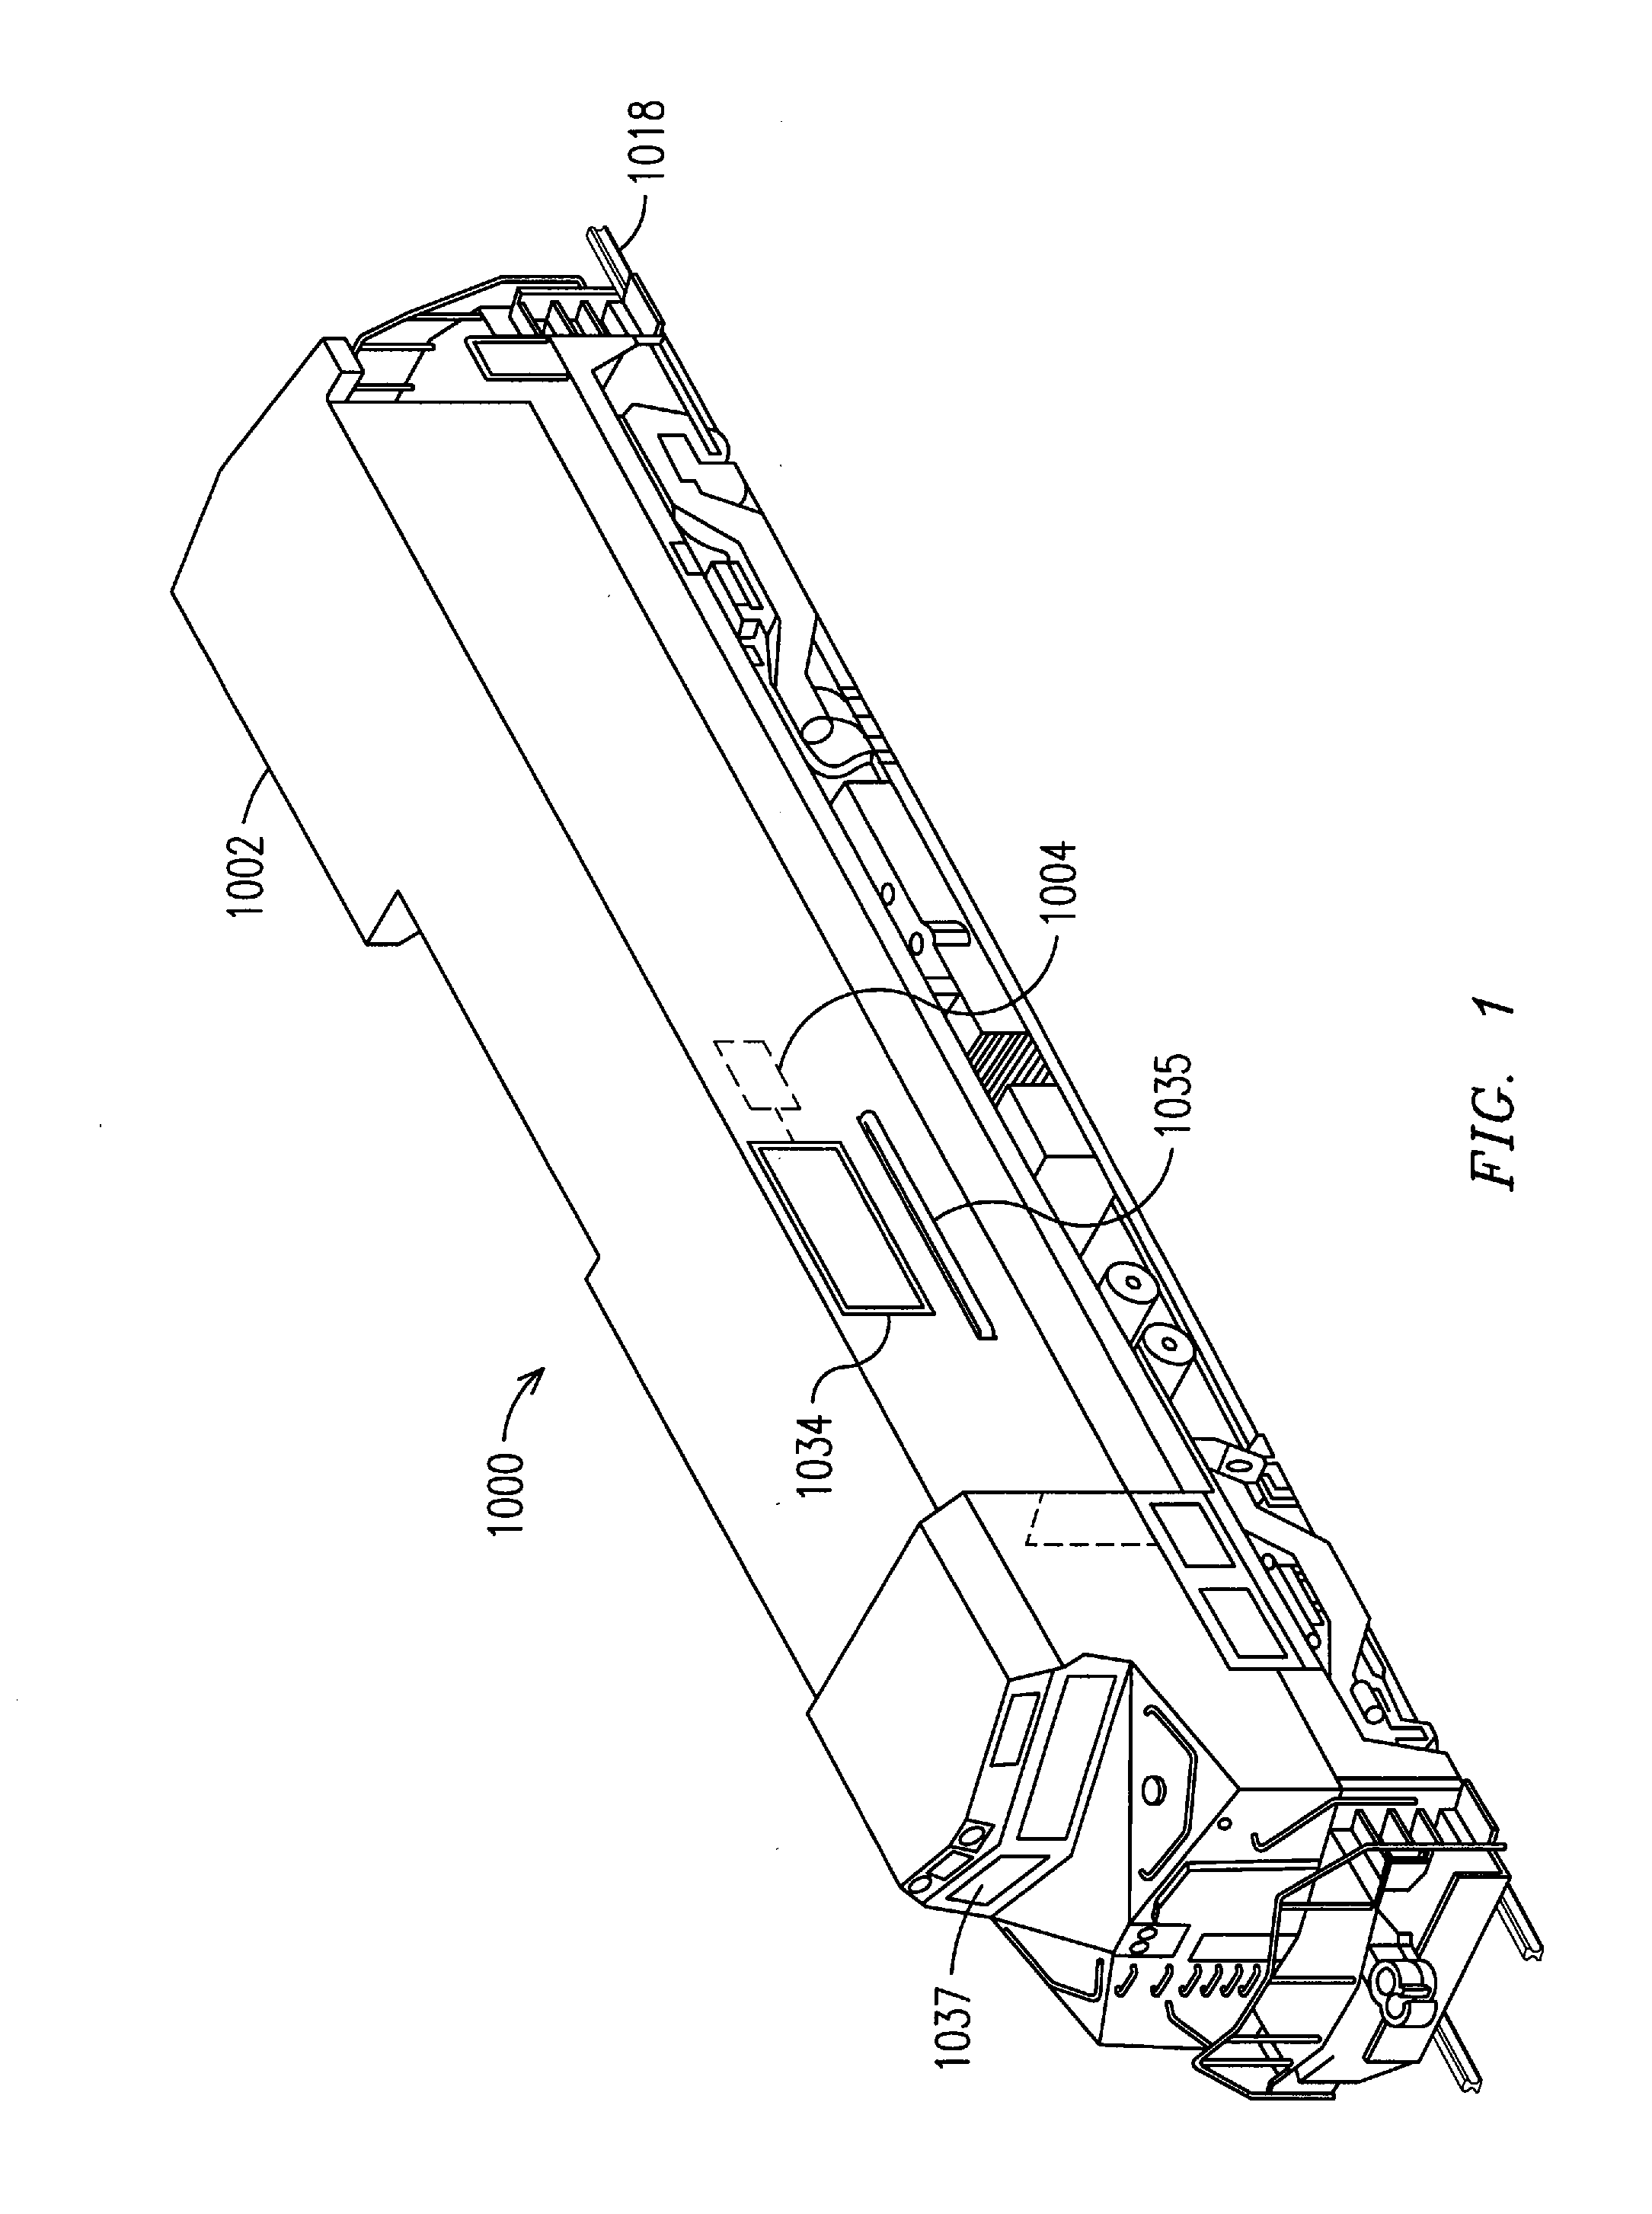 System and Method For Monitoring An Alertness Of An Operator Of A Powered System